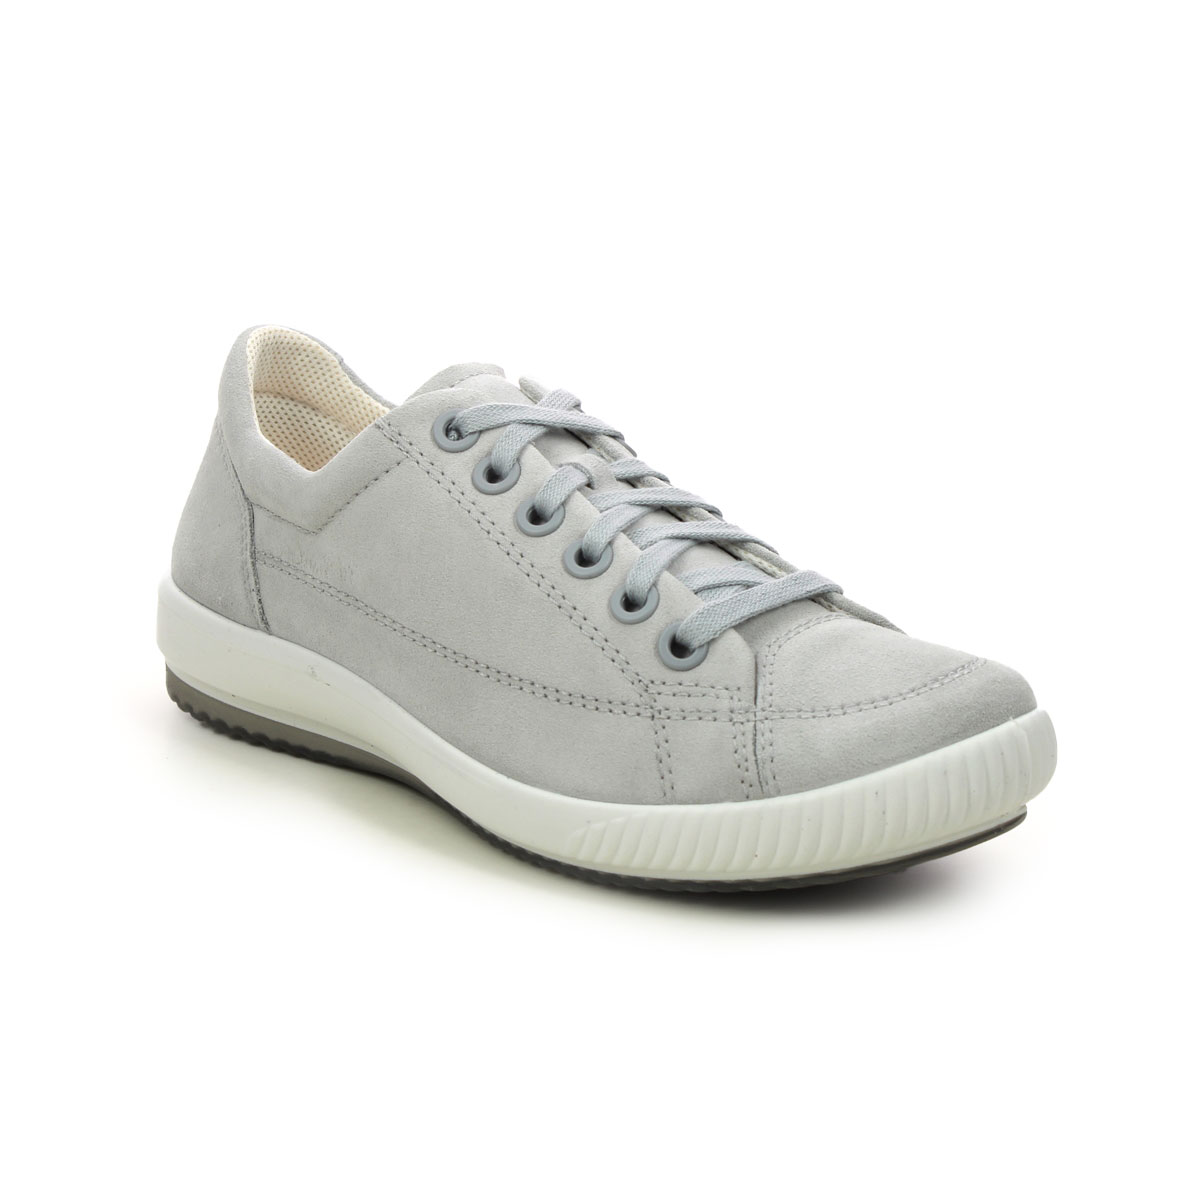 Legero Tanaro 5 Stitch Light Grey Suede Womens lacing shoes 2000161-2500 in a Plain Leather in Size 6.5